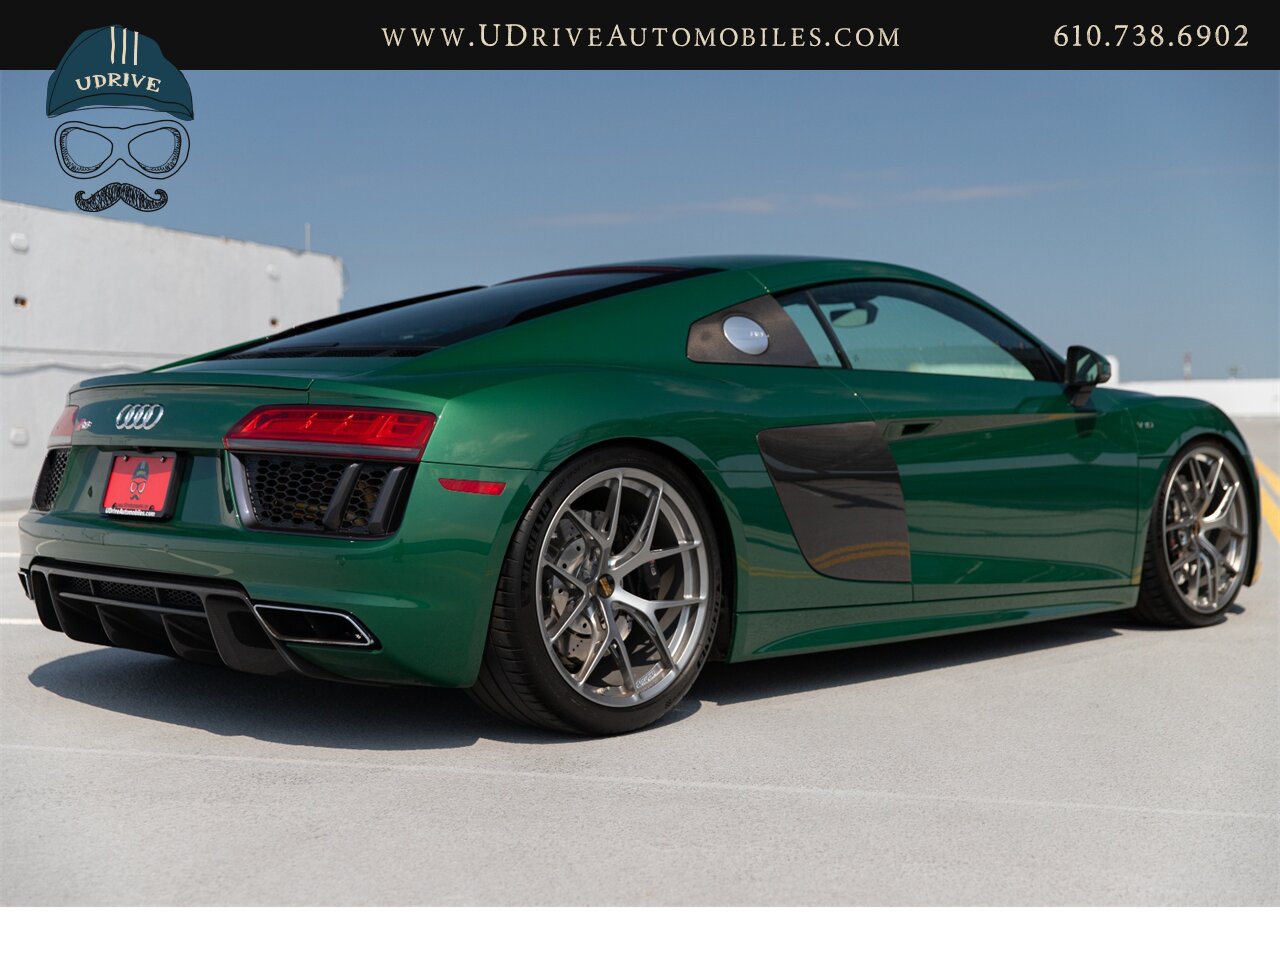 2017 Audi R8 Audi Exclusive Avocado Green Vermont Brown Leather  Diamond Stitching V10 Carbon Fiber - Photo 22 - West Chester, PA 19382